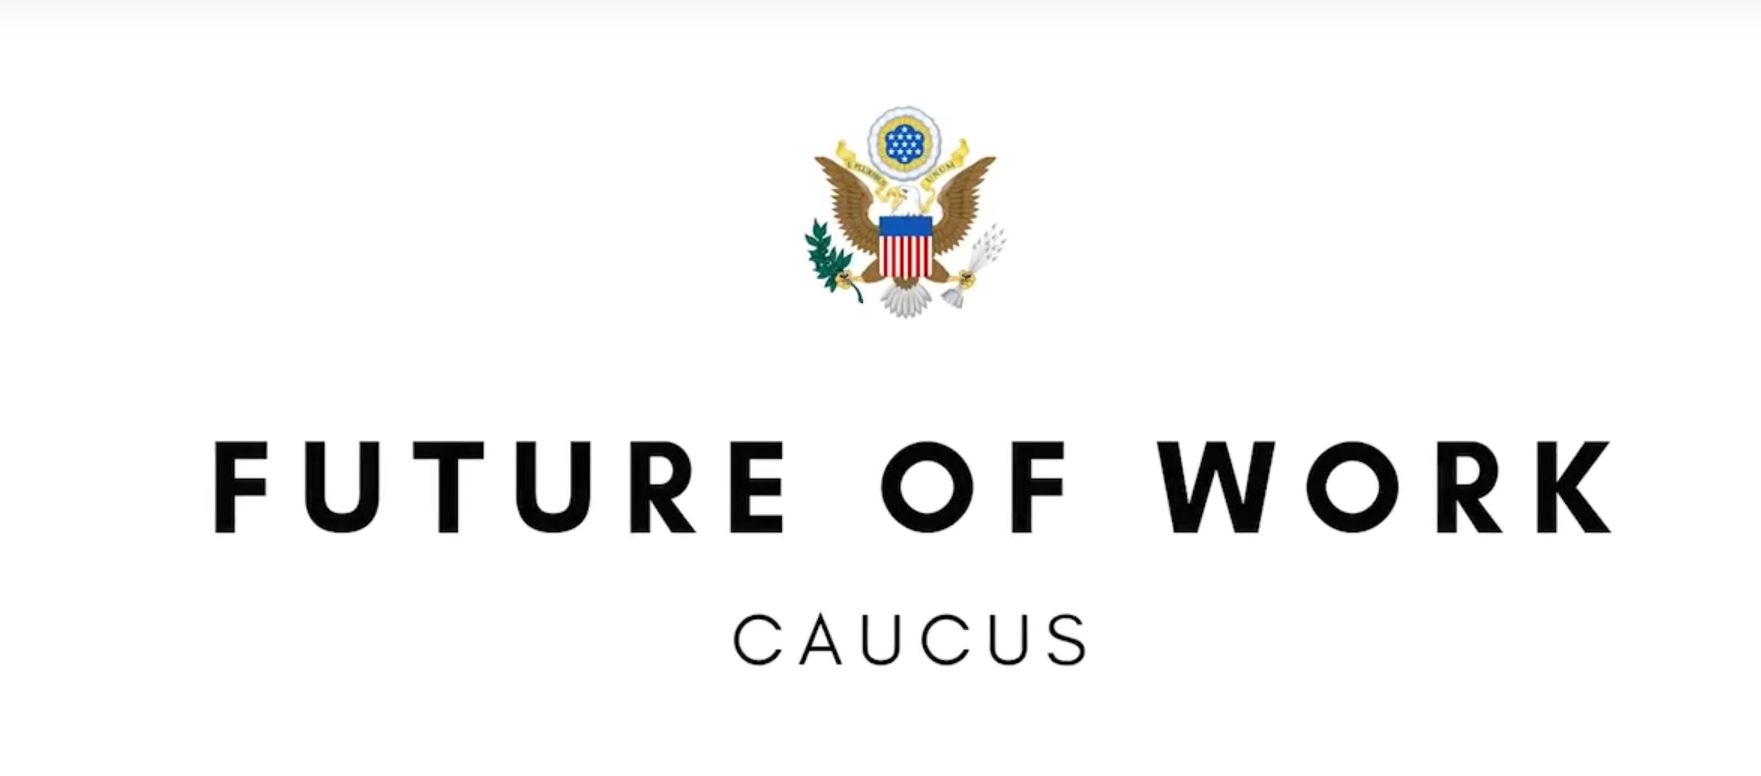 XRA CEO, ELIZABETH HYMAN, JOINED FUTURE OF WORK CAUCUS PANEL TO EXPLORE XR’S IMPACT ON WORKPLACE BENEFITS